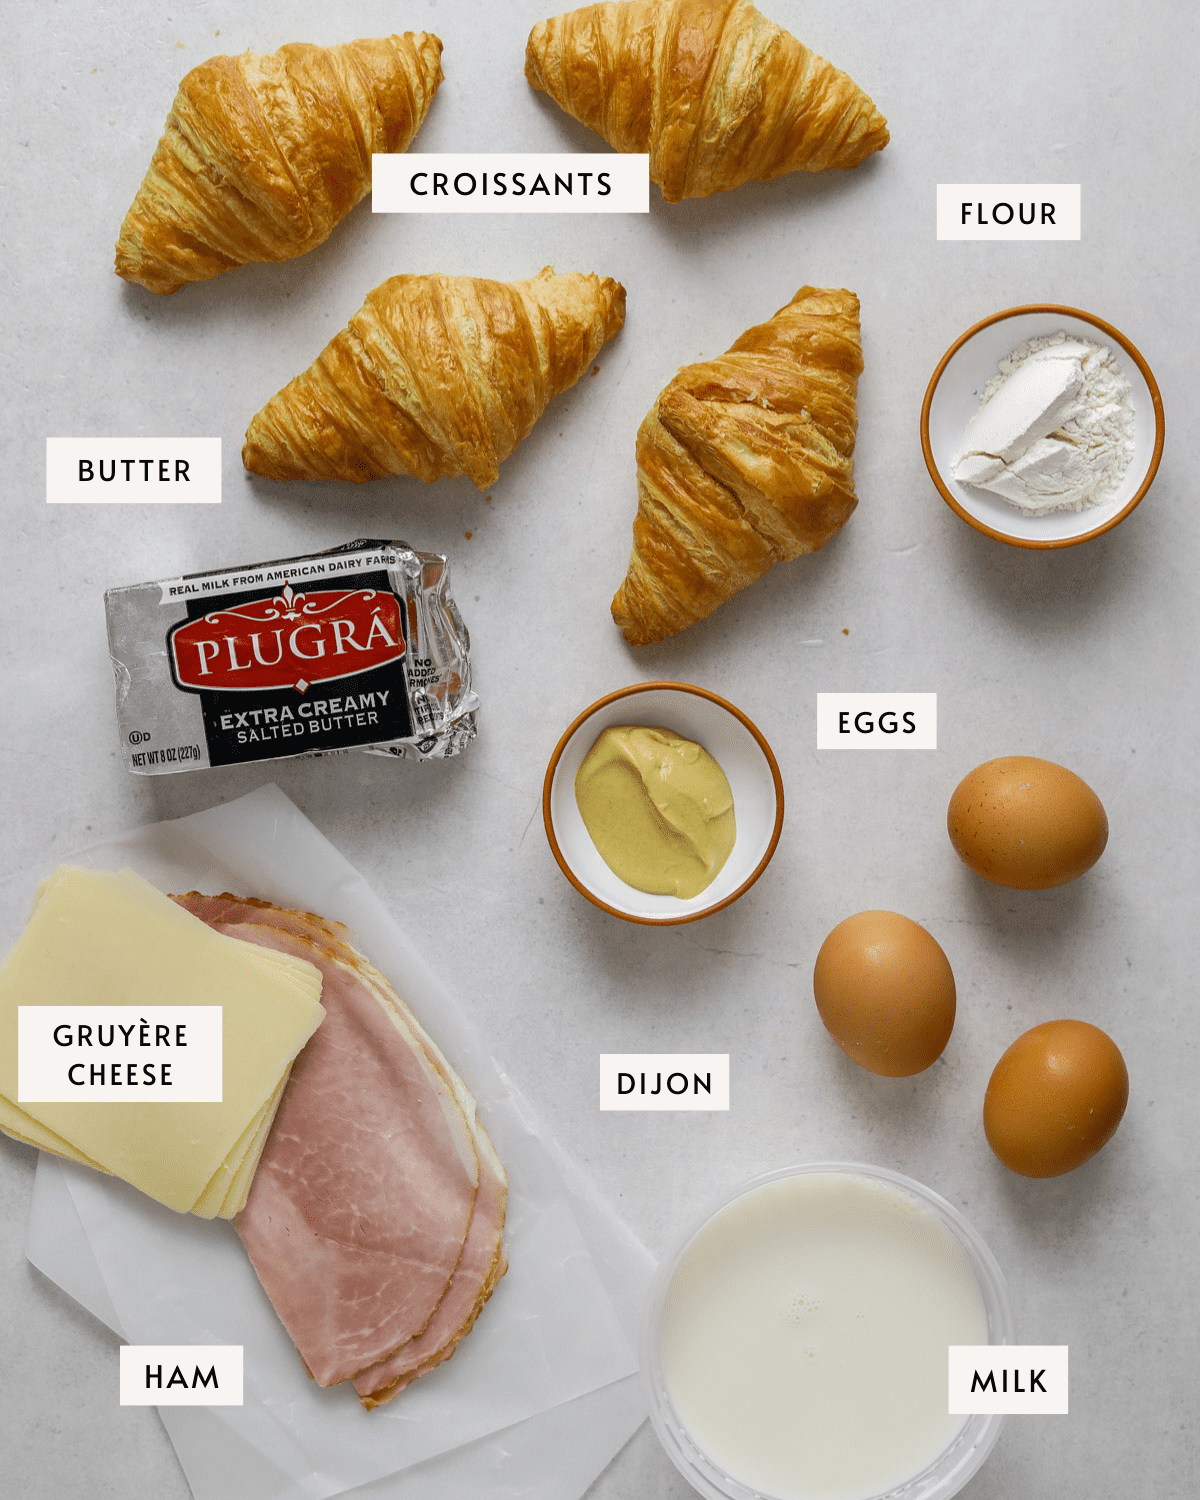 4 mini croissants, butter, a small white dish of flour, dijon mustard, three eggs, a cup of milk, sliced gruyère cheese and ham